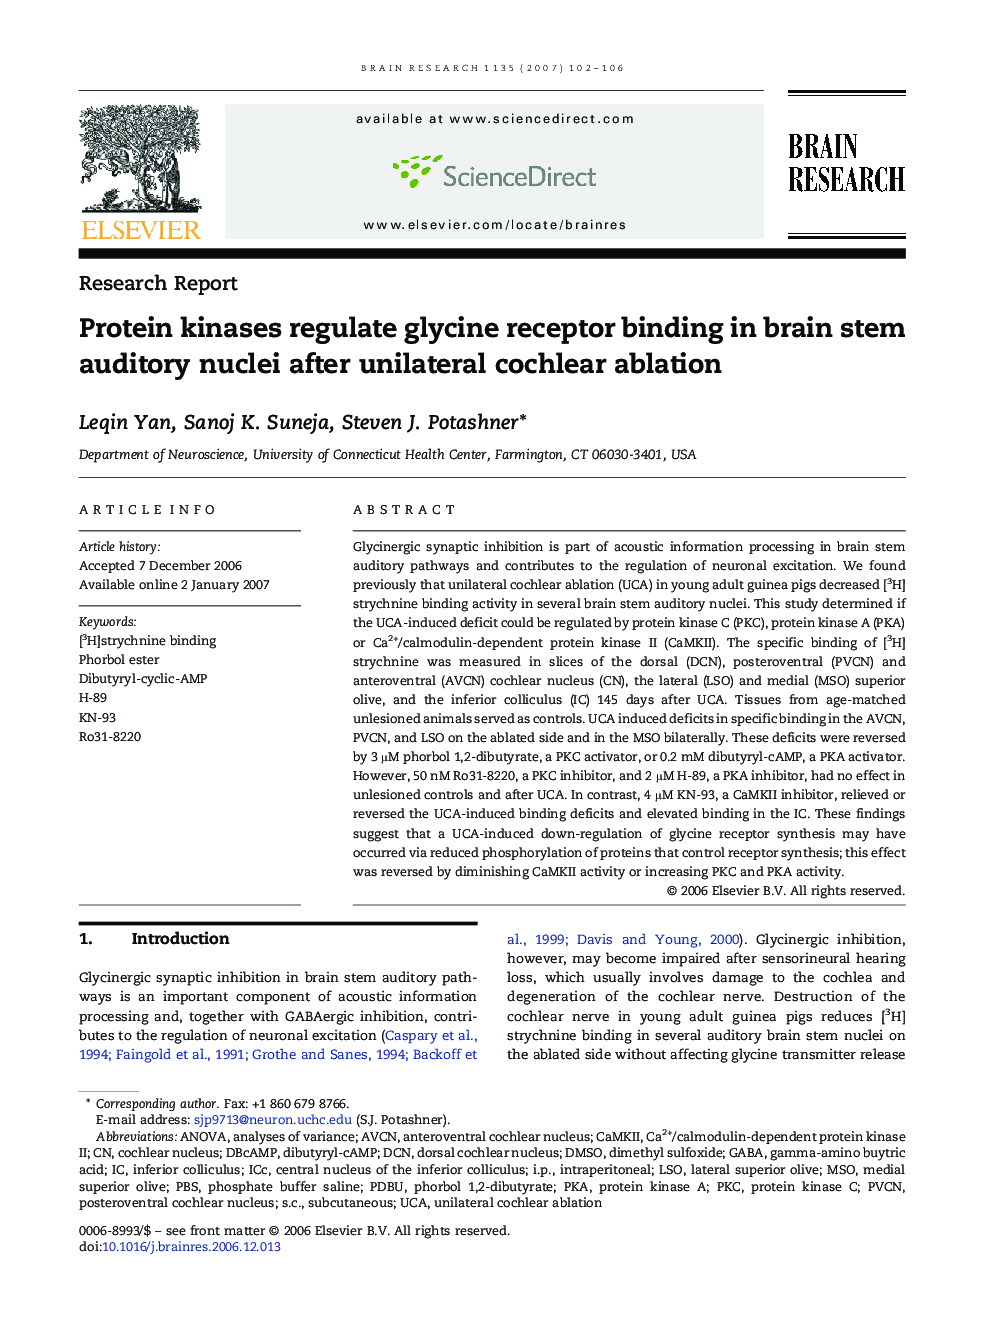 Research ReportProtein kinases regulate glycine receptor binding in brain stem auditory nuclei after unilateral cochlear ablation